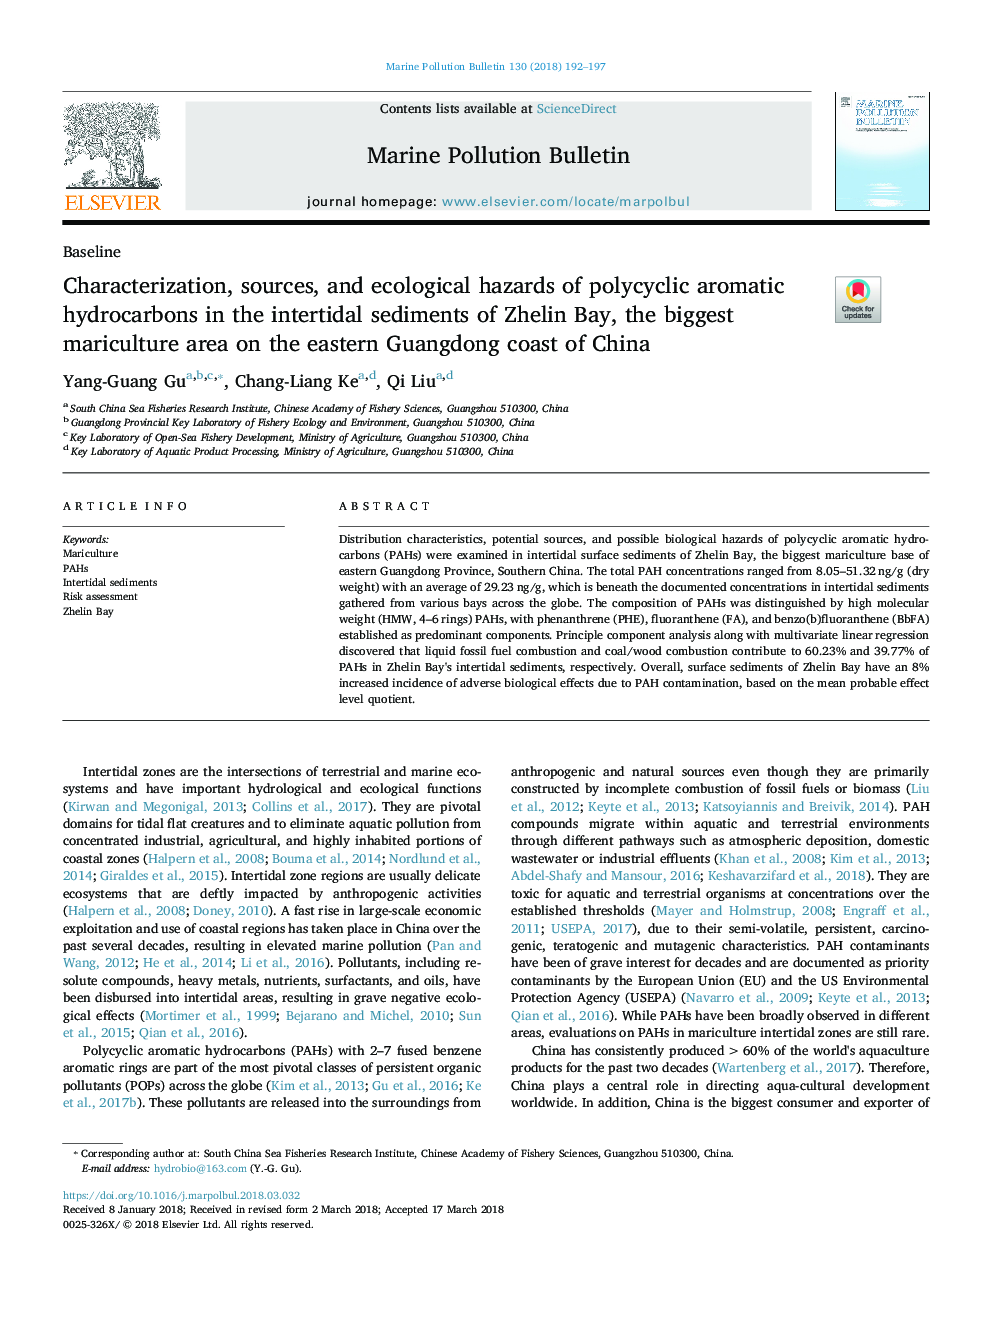 Characterization, sources, and ecological hazards of polycyclic aromatic hydrocarbons in the intertidal sediments of Zhelin Bay, the biggest mariculture area on the eastern Guangdong coast of China